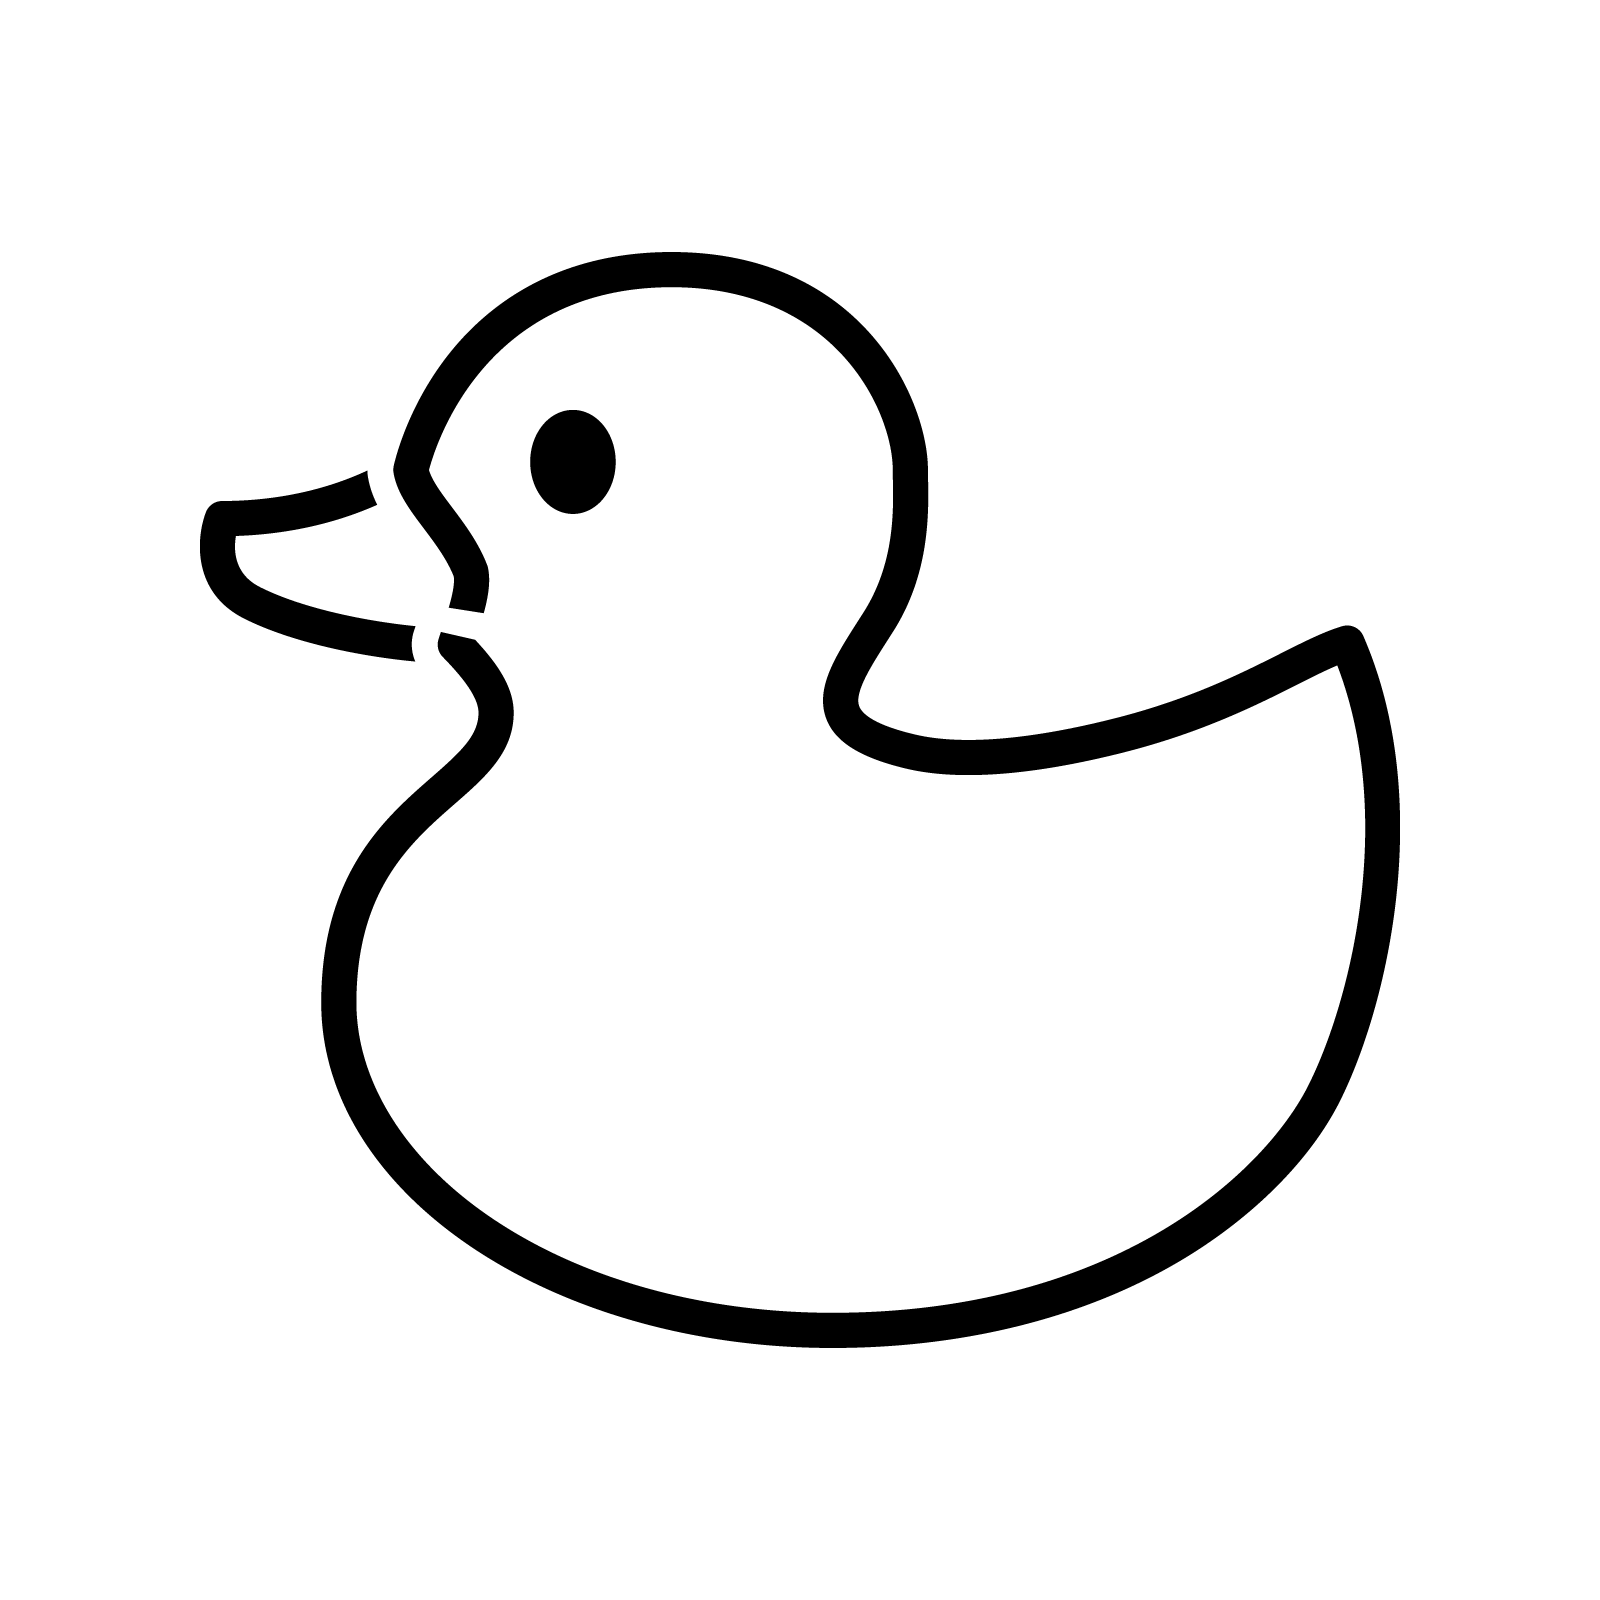 the-best-free-duck-silhouette-images-download-from-990-free